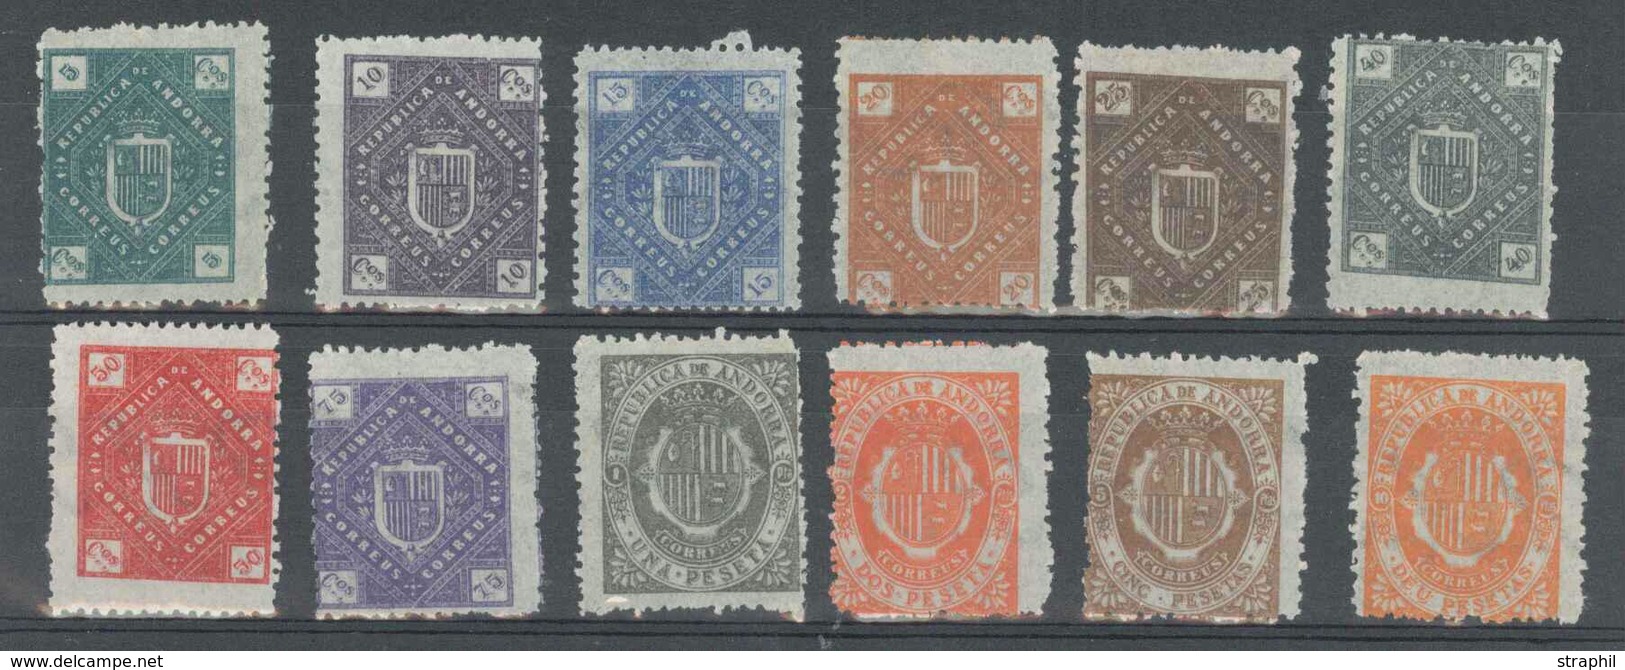 (*) TIMBRES POSTE - (*) - Poste Locale N°1/12 - Dentelé 13½ - TB - Unused Stamps